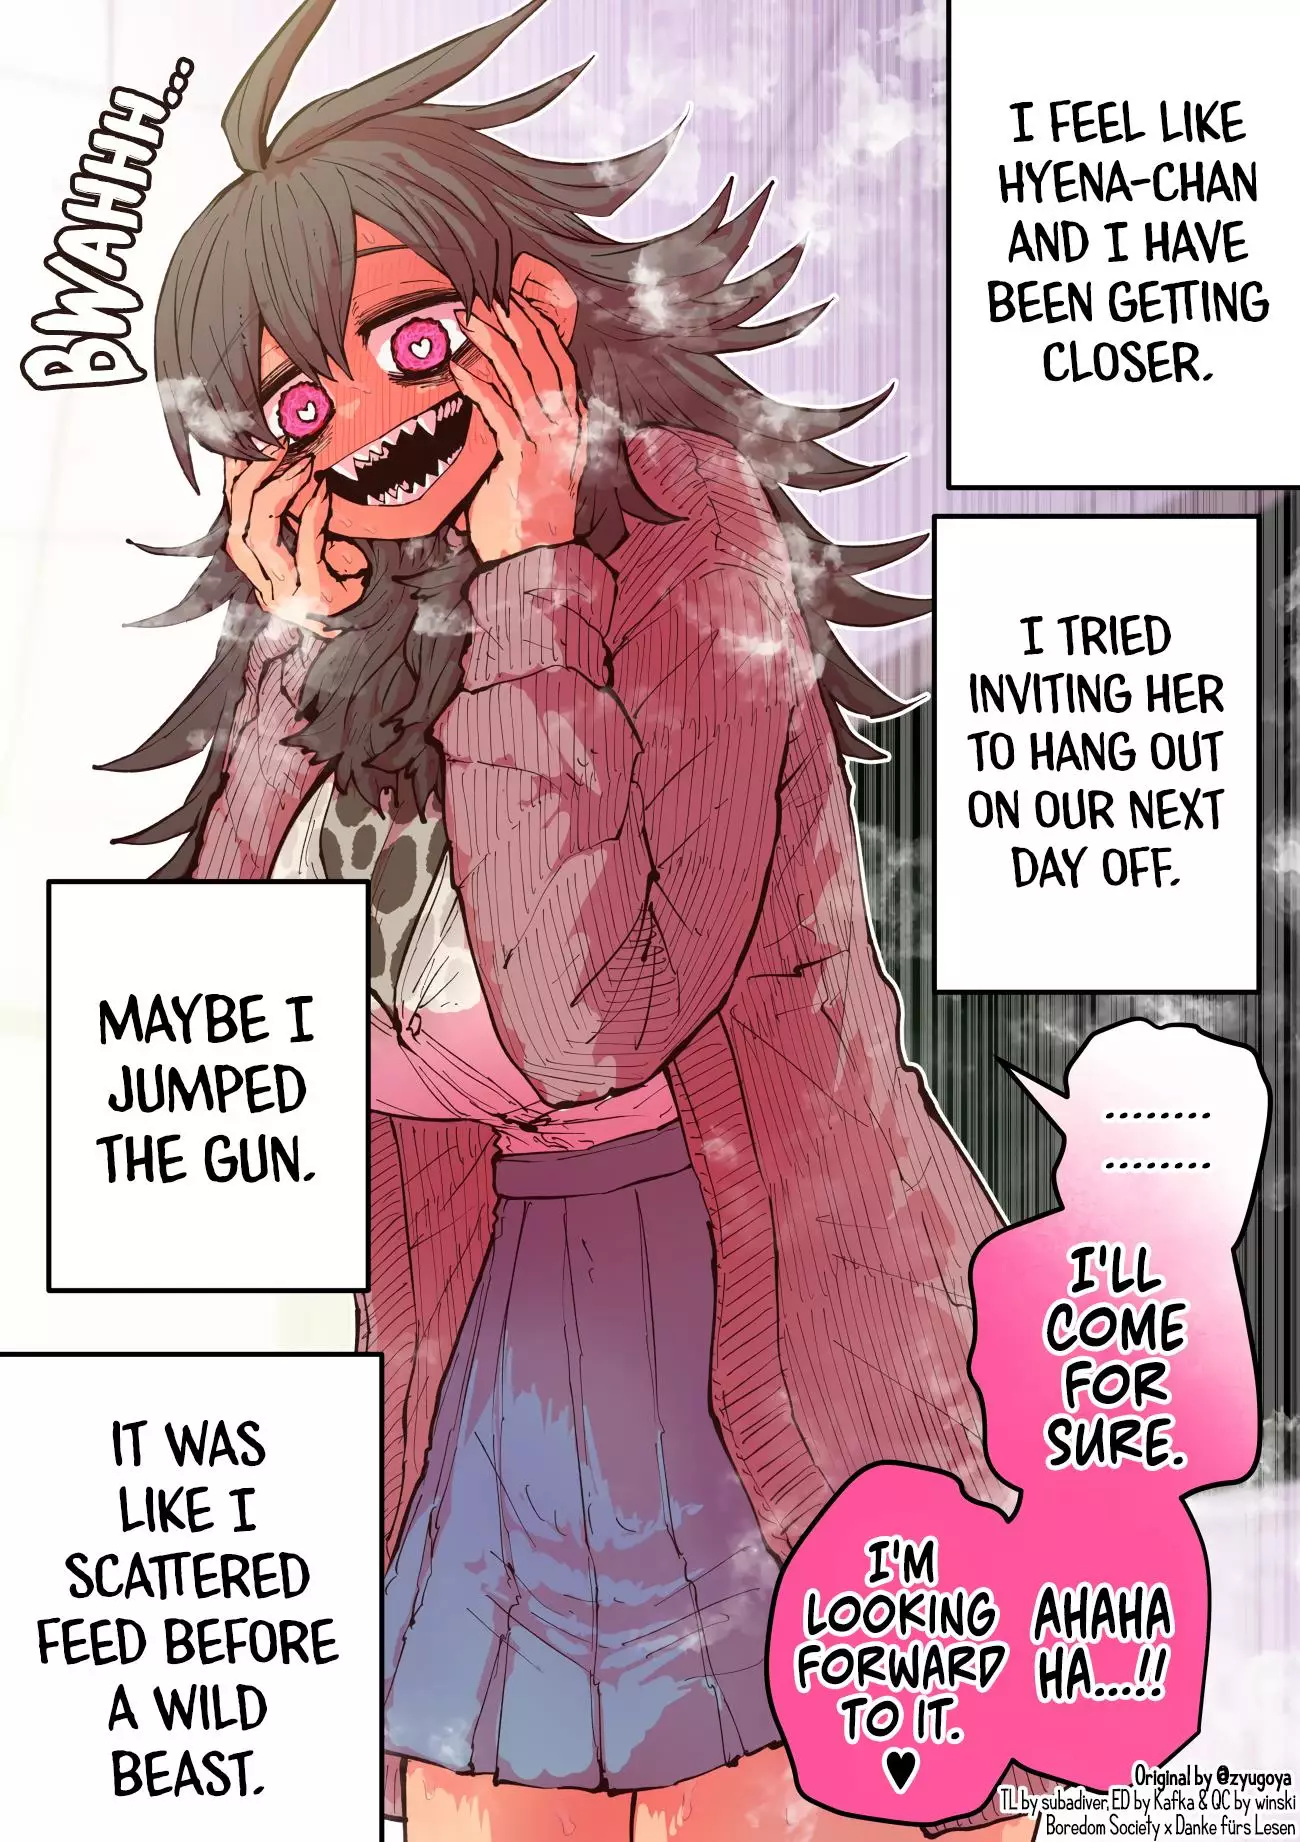 Being Targeted By Hyena-Chan - 5 page 1-47558db0